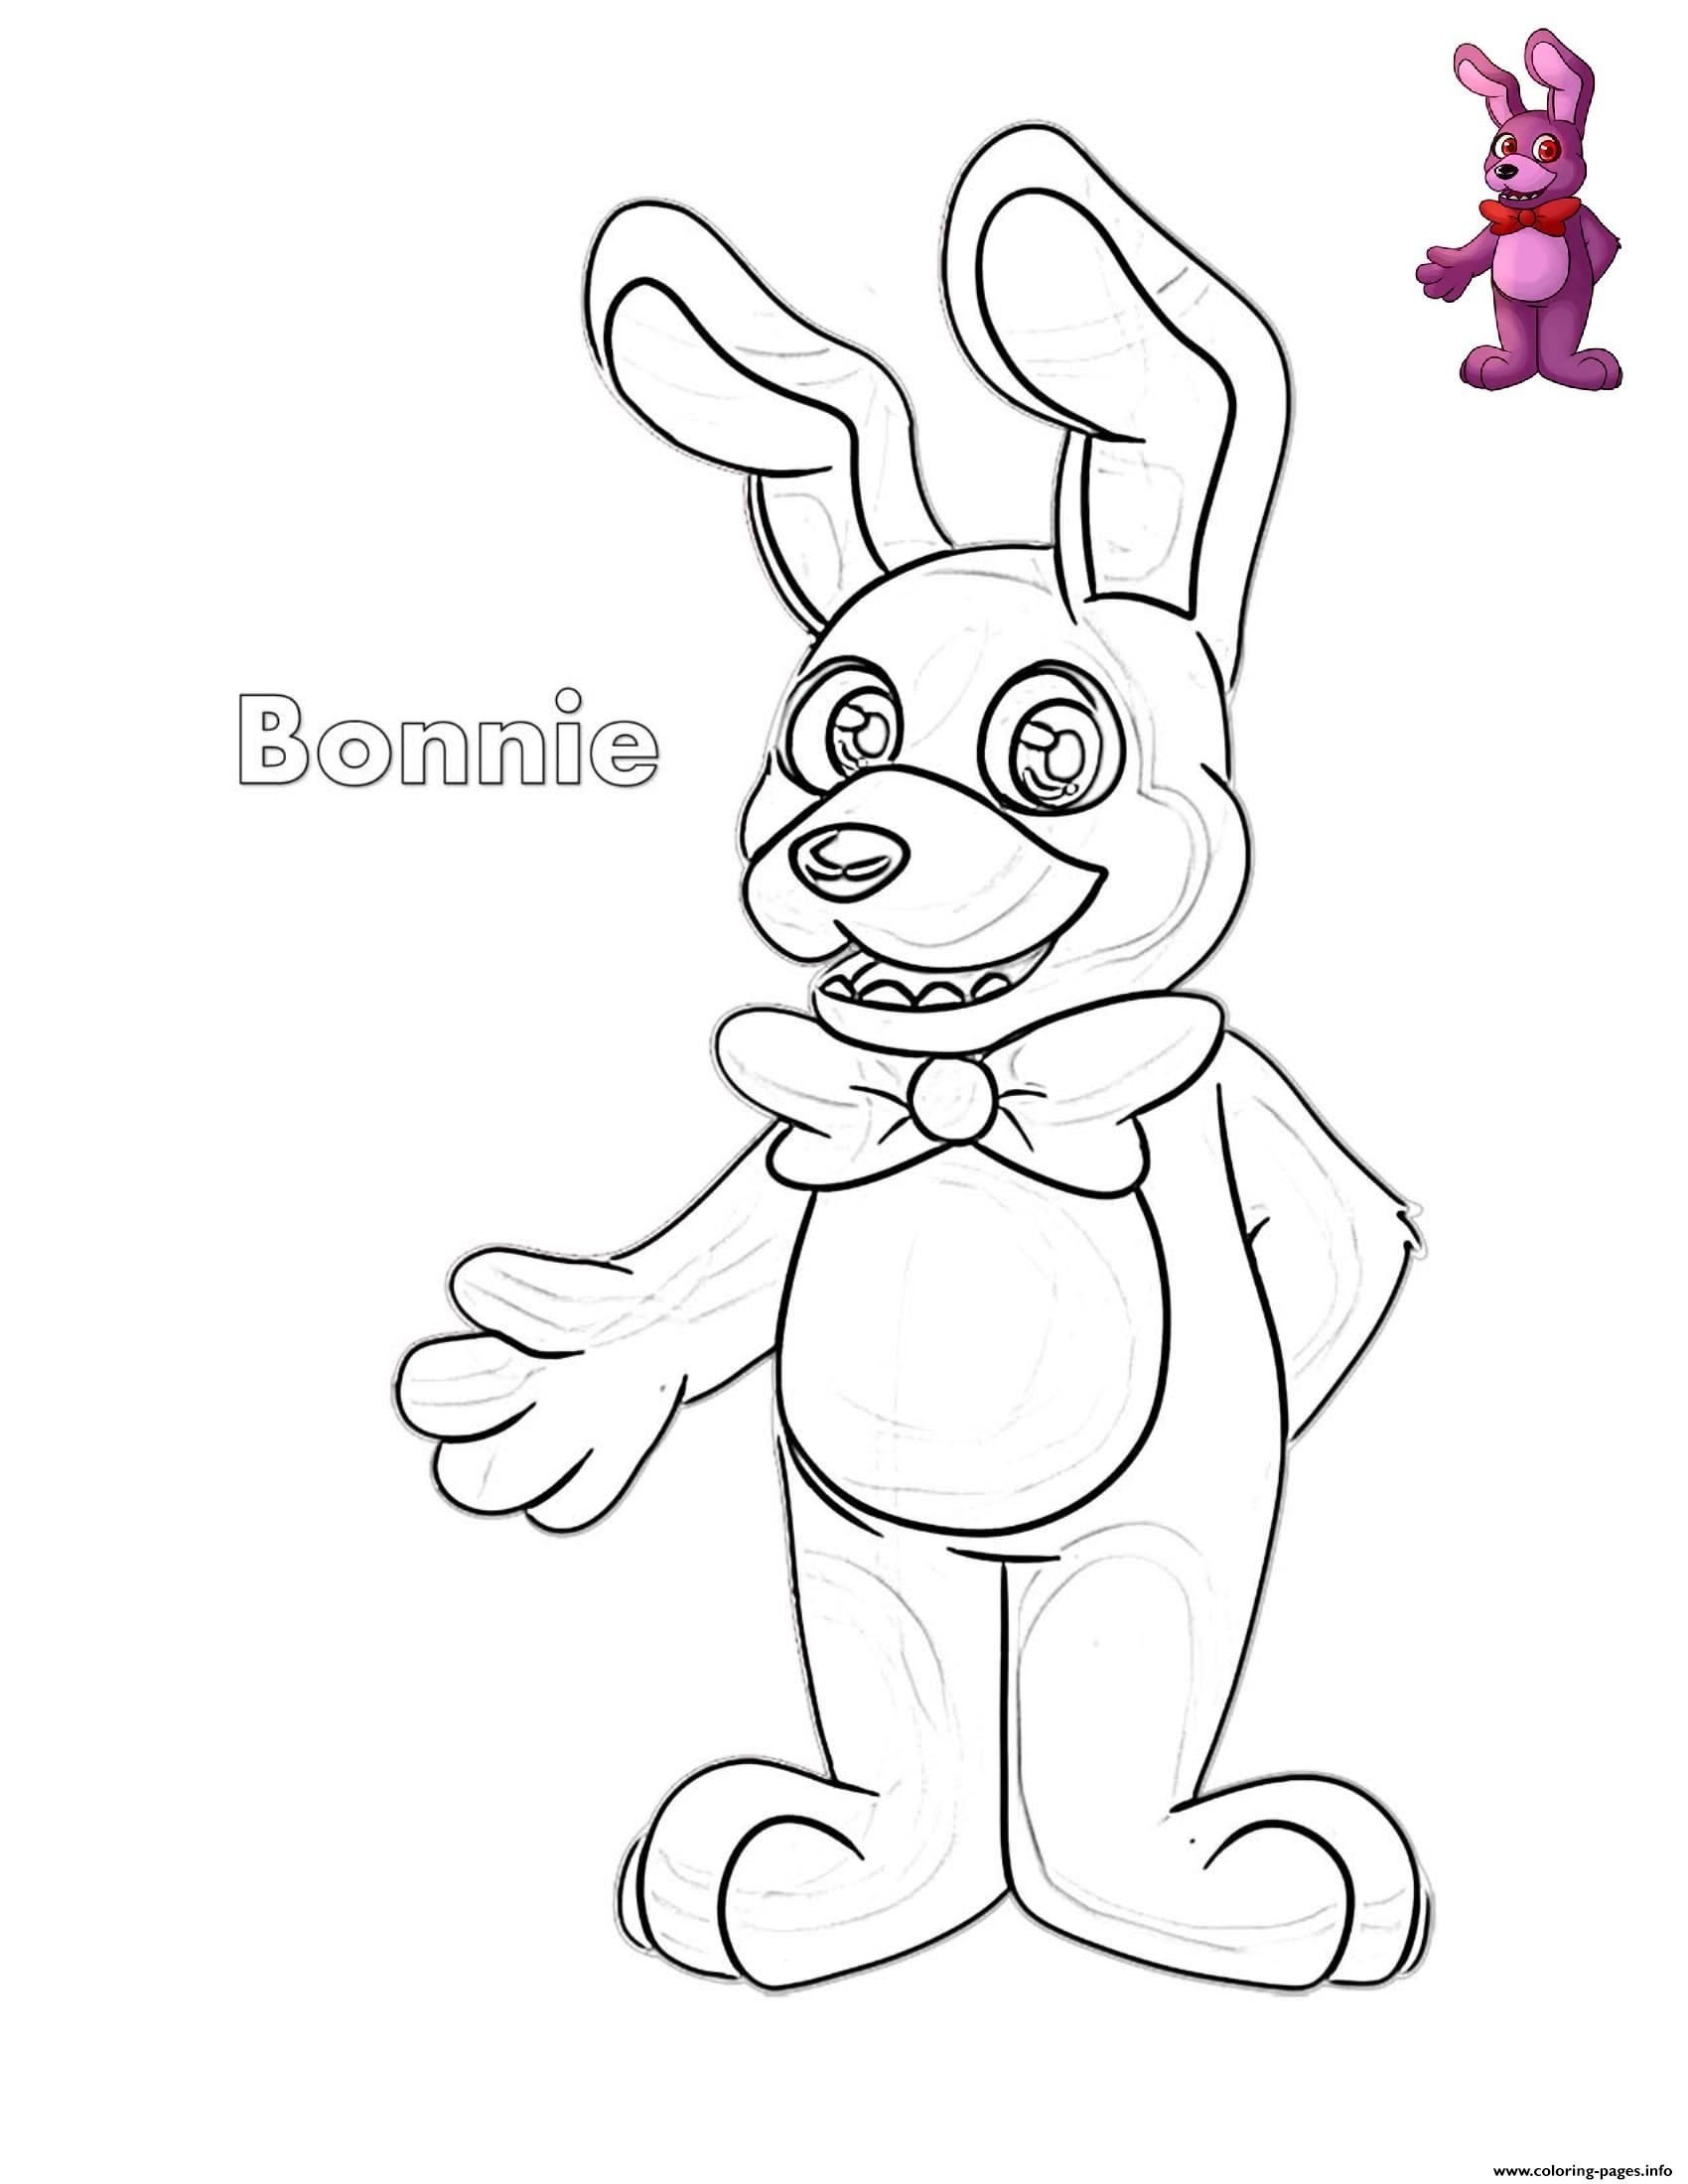 Bonnie From FNAF coloring